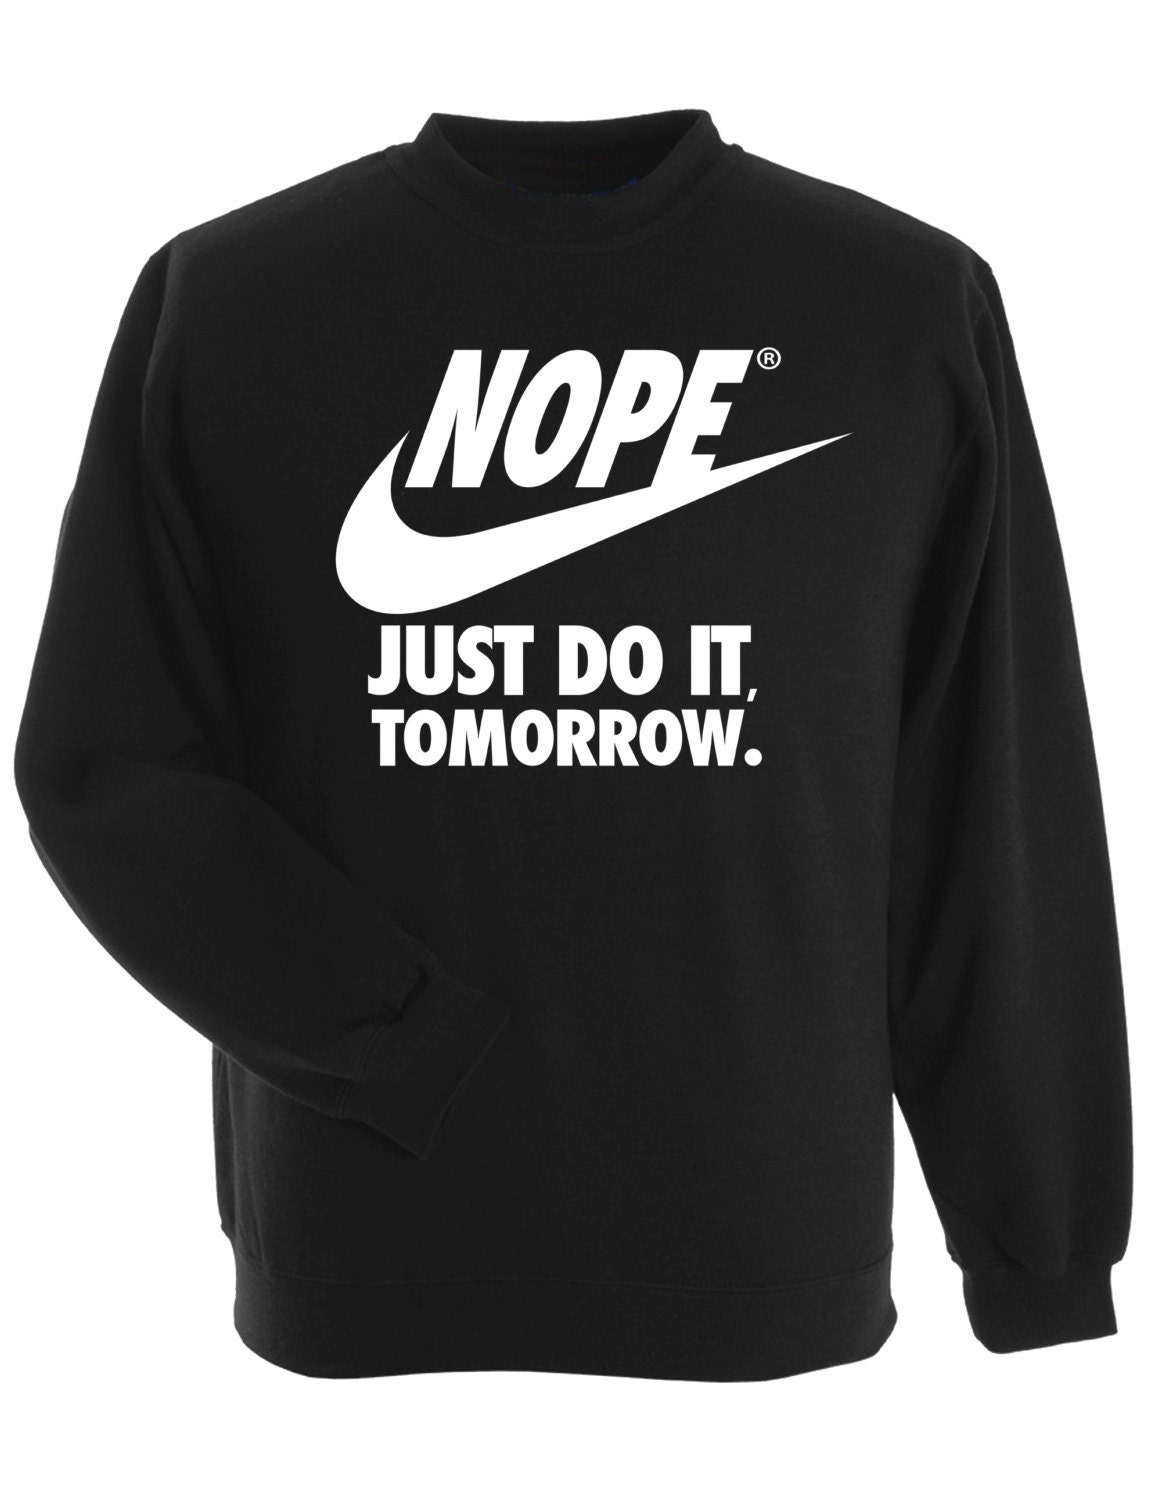 Nope just do it tomorrow sweatshirt. Not the sporty type